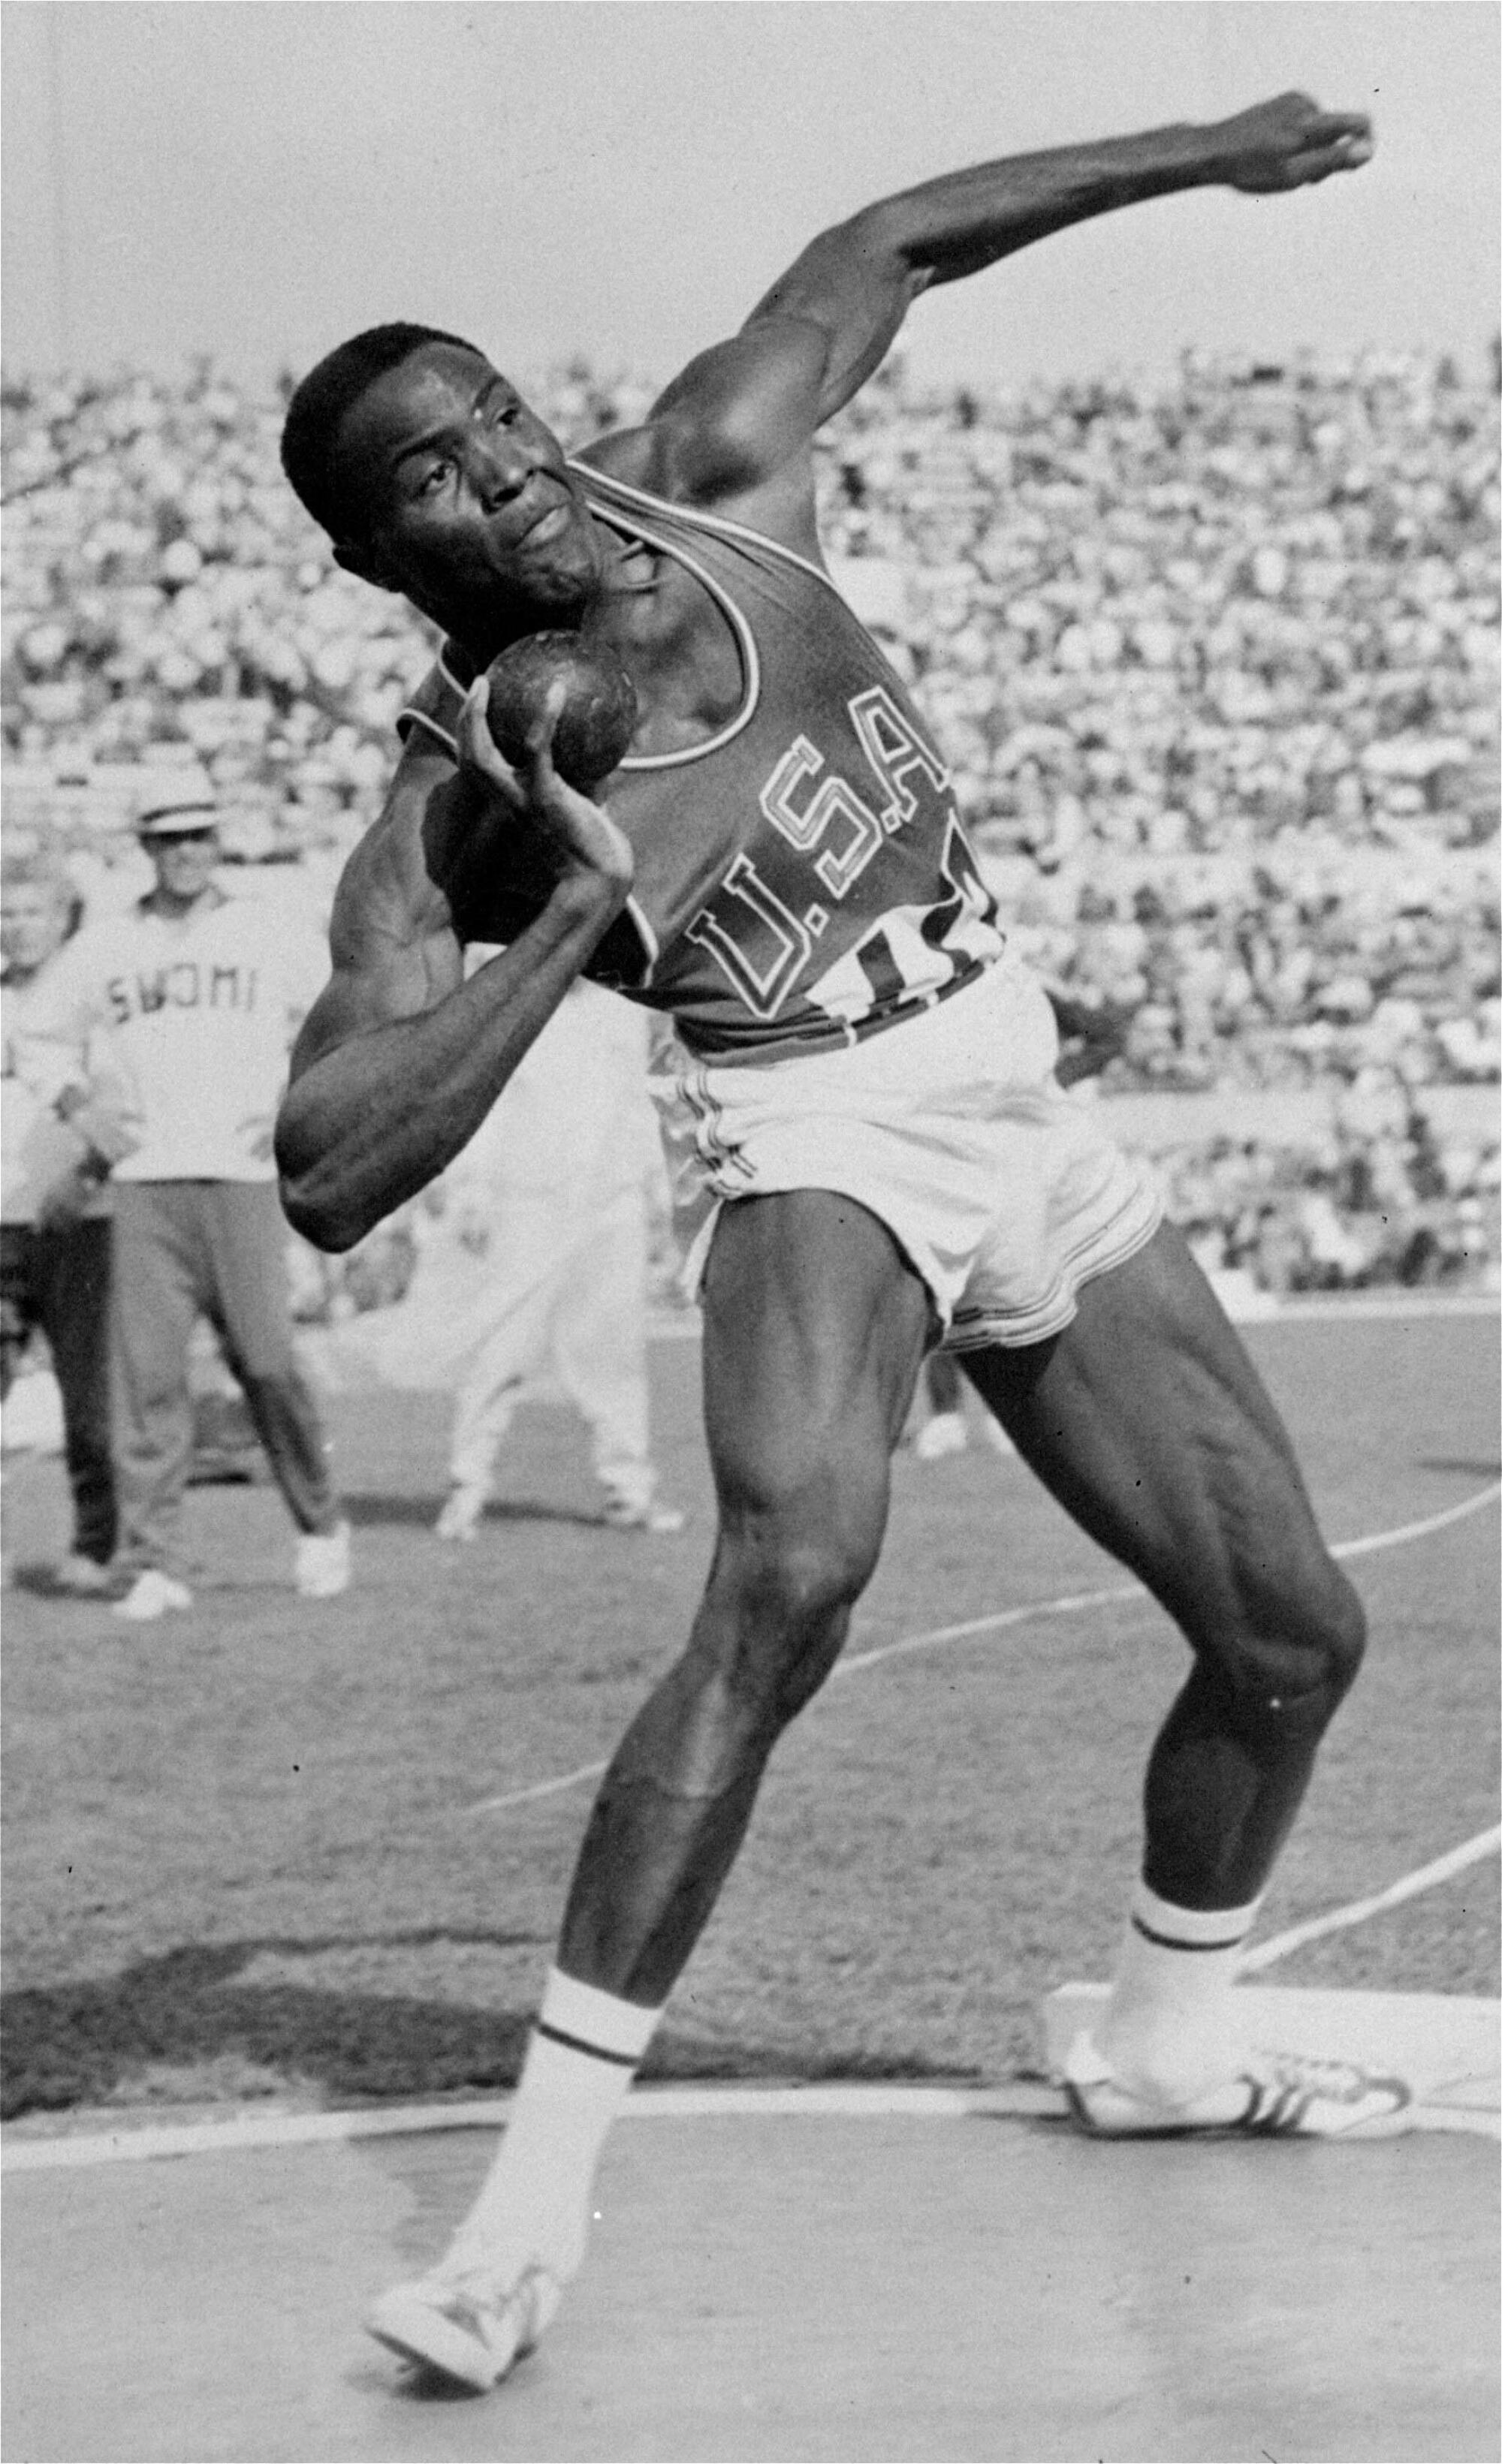 Rafer Johnson competes in the shot put, one of the events in the decathlon, at the 1960 Olympics in Rome.